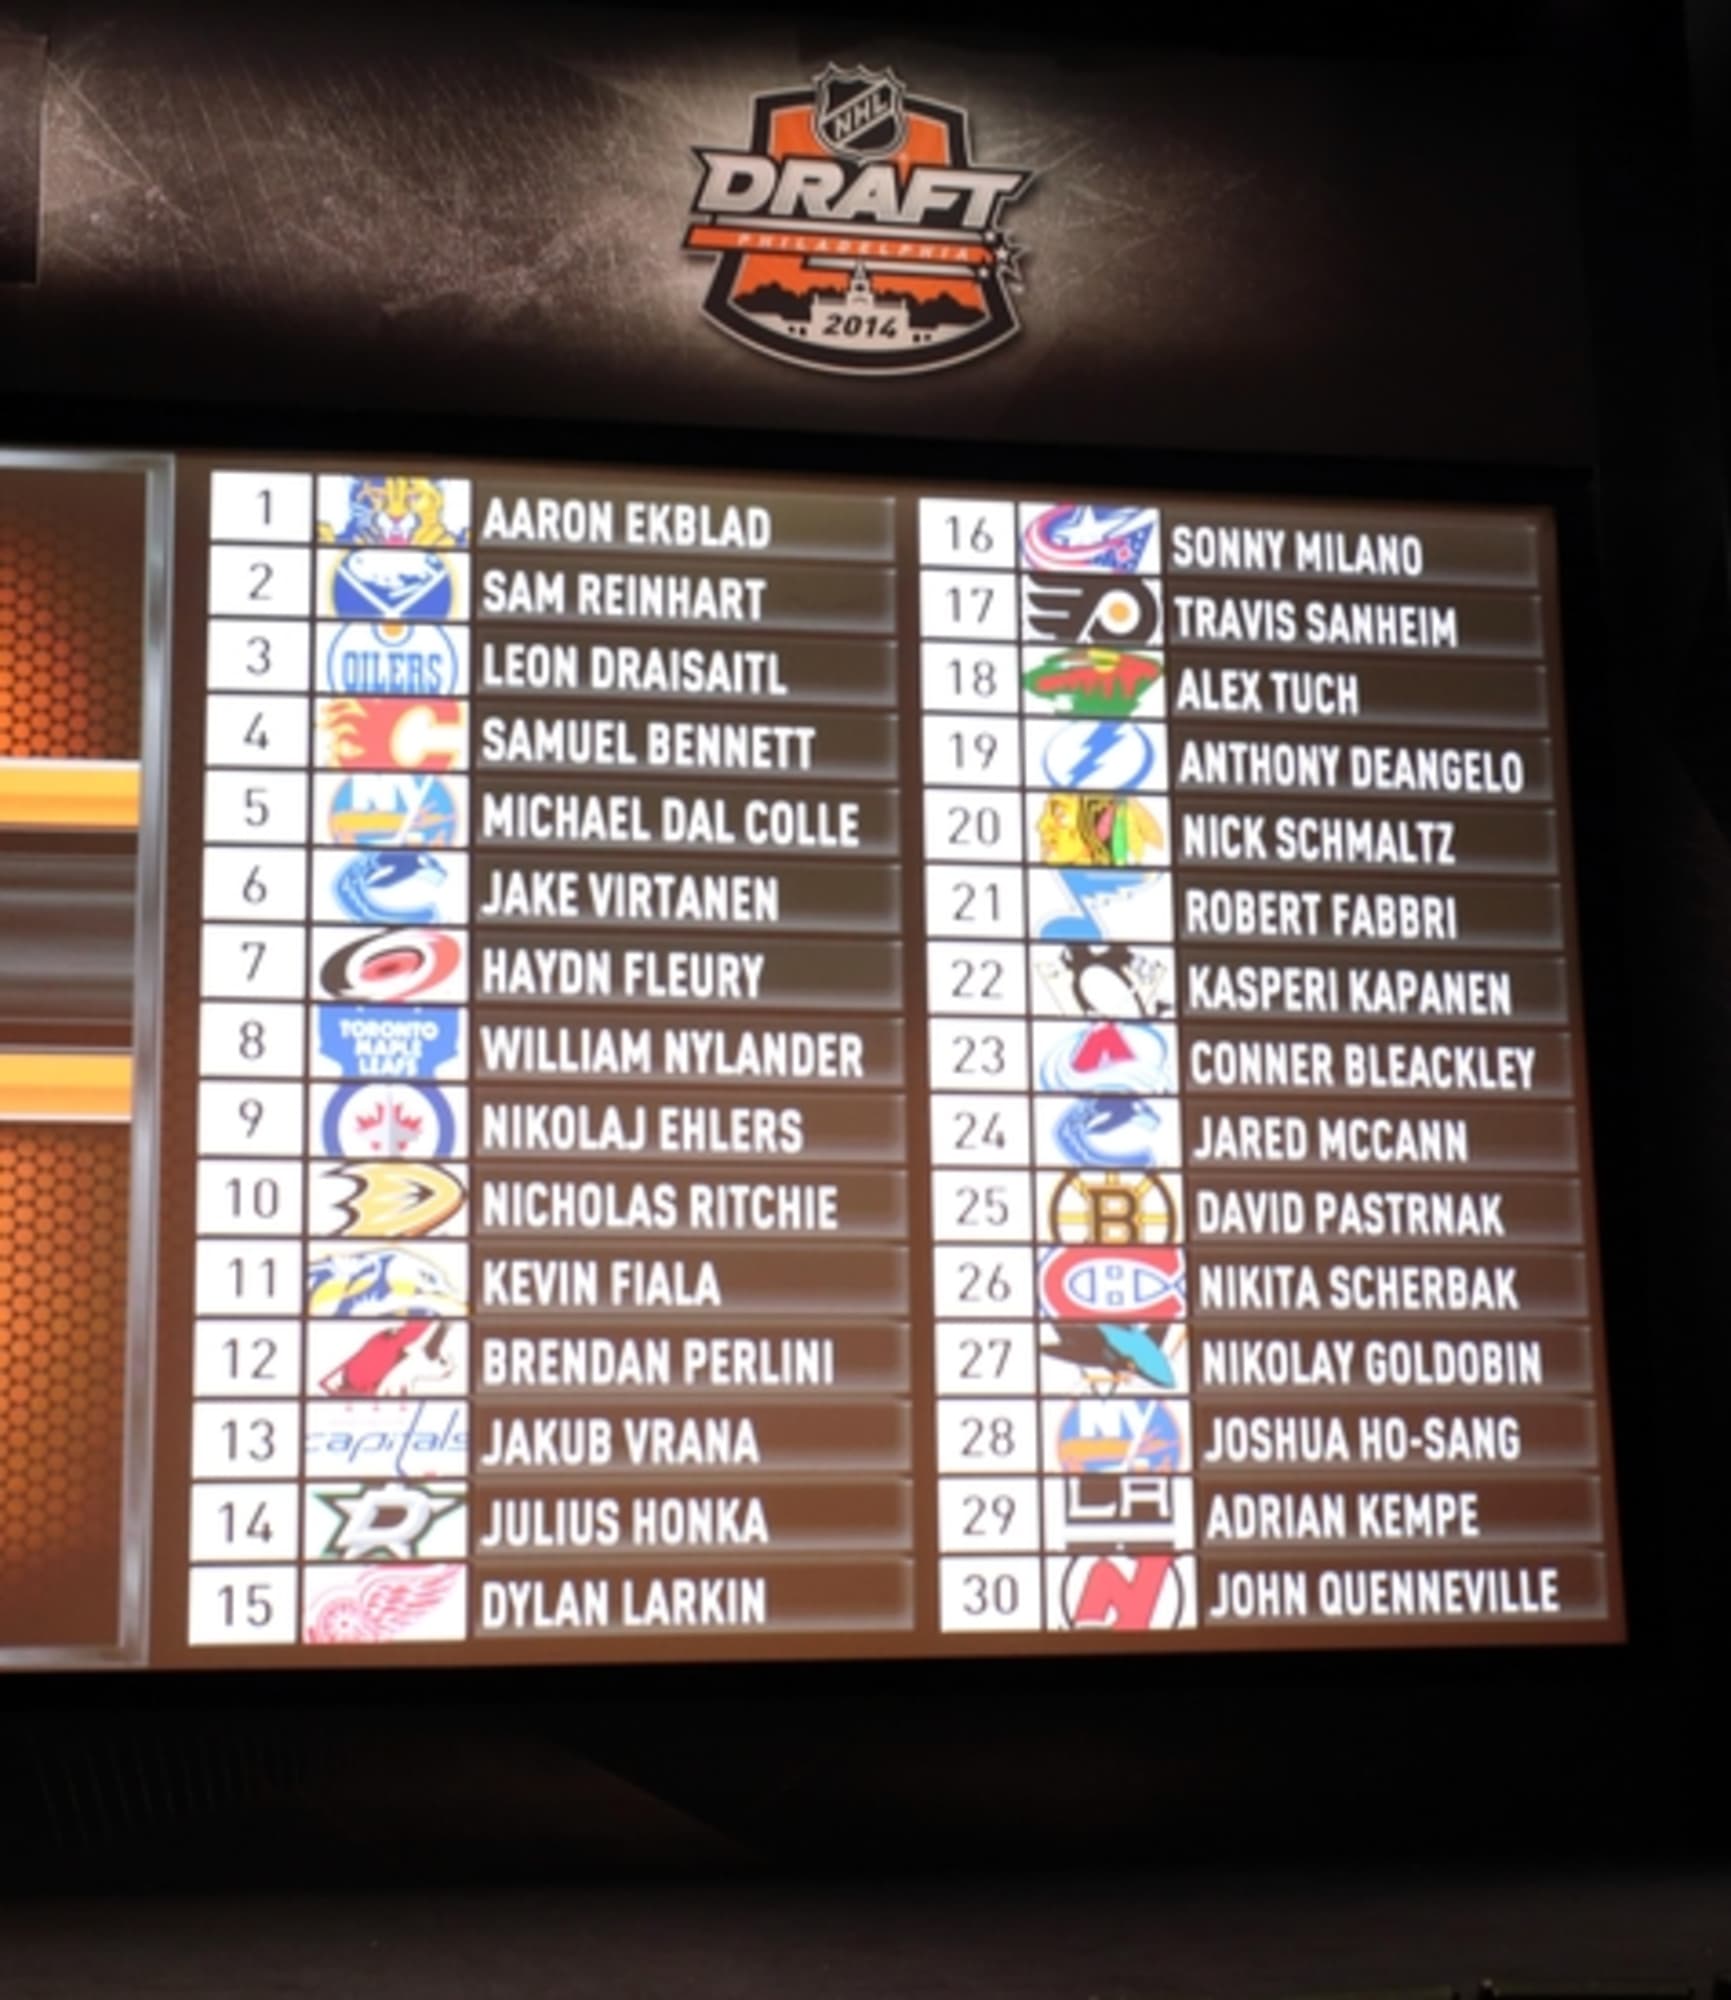 NHL Draft 2014: Complete Round 1 results